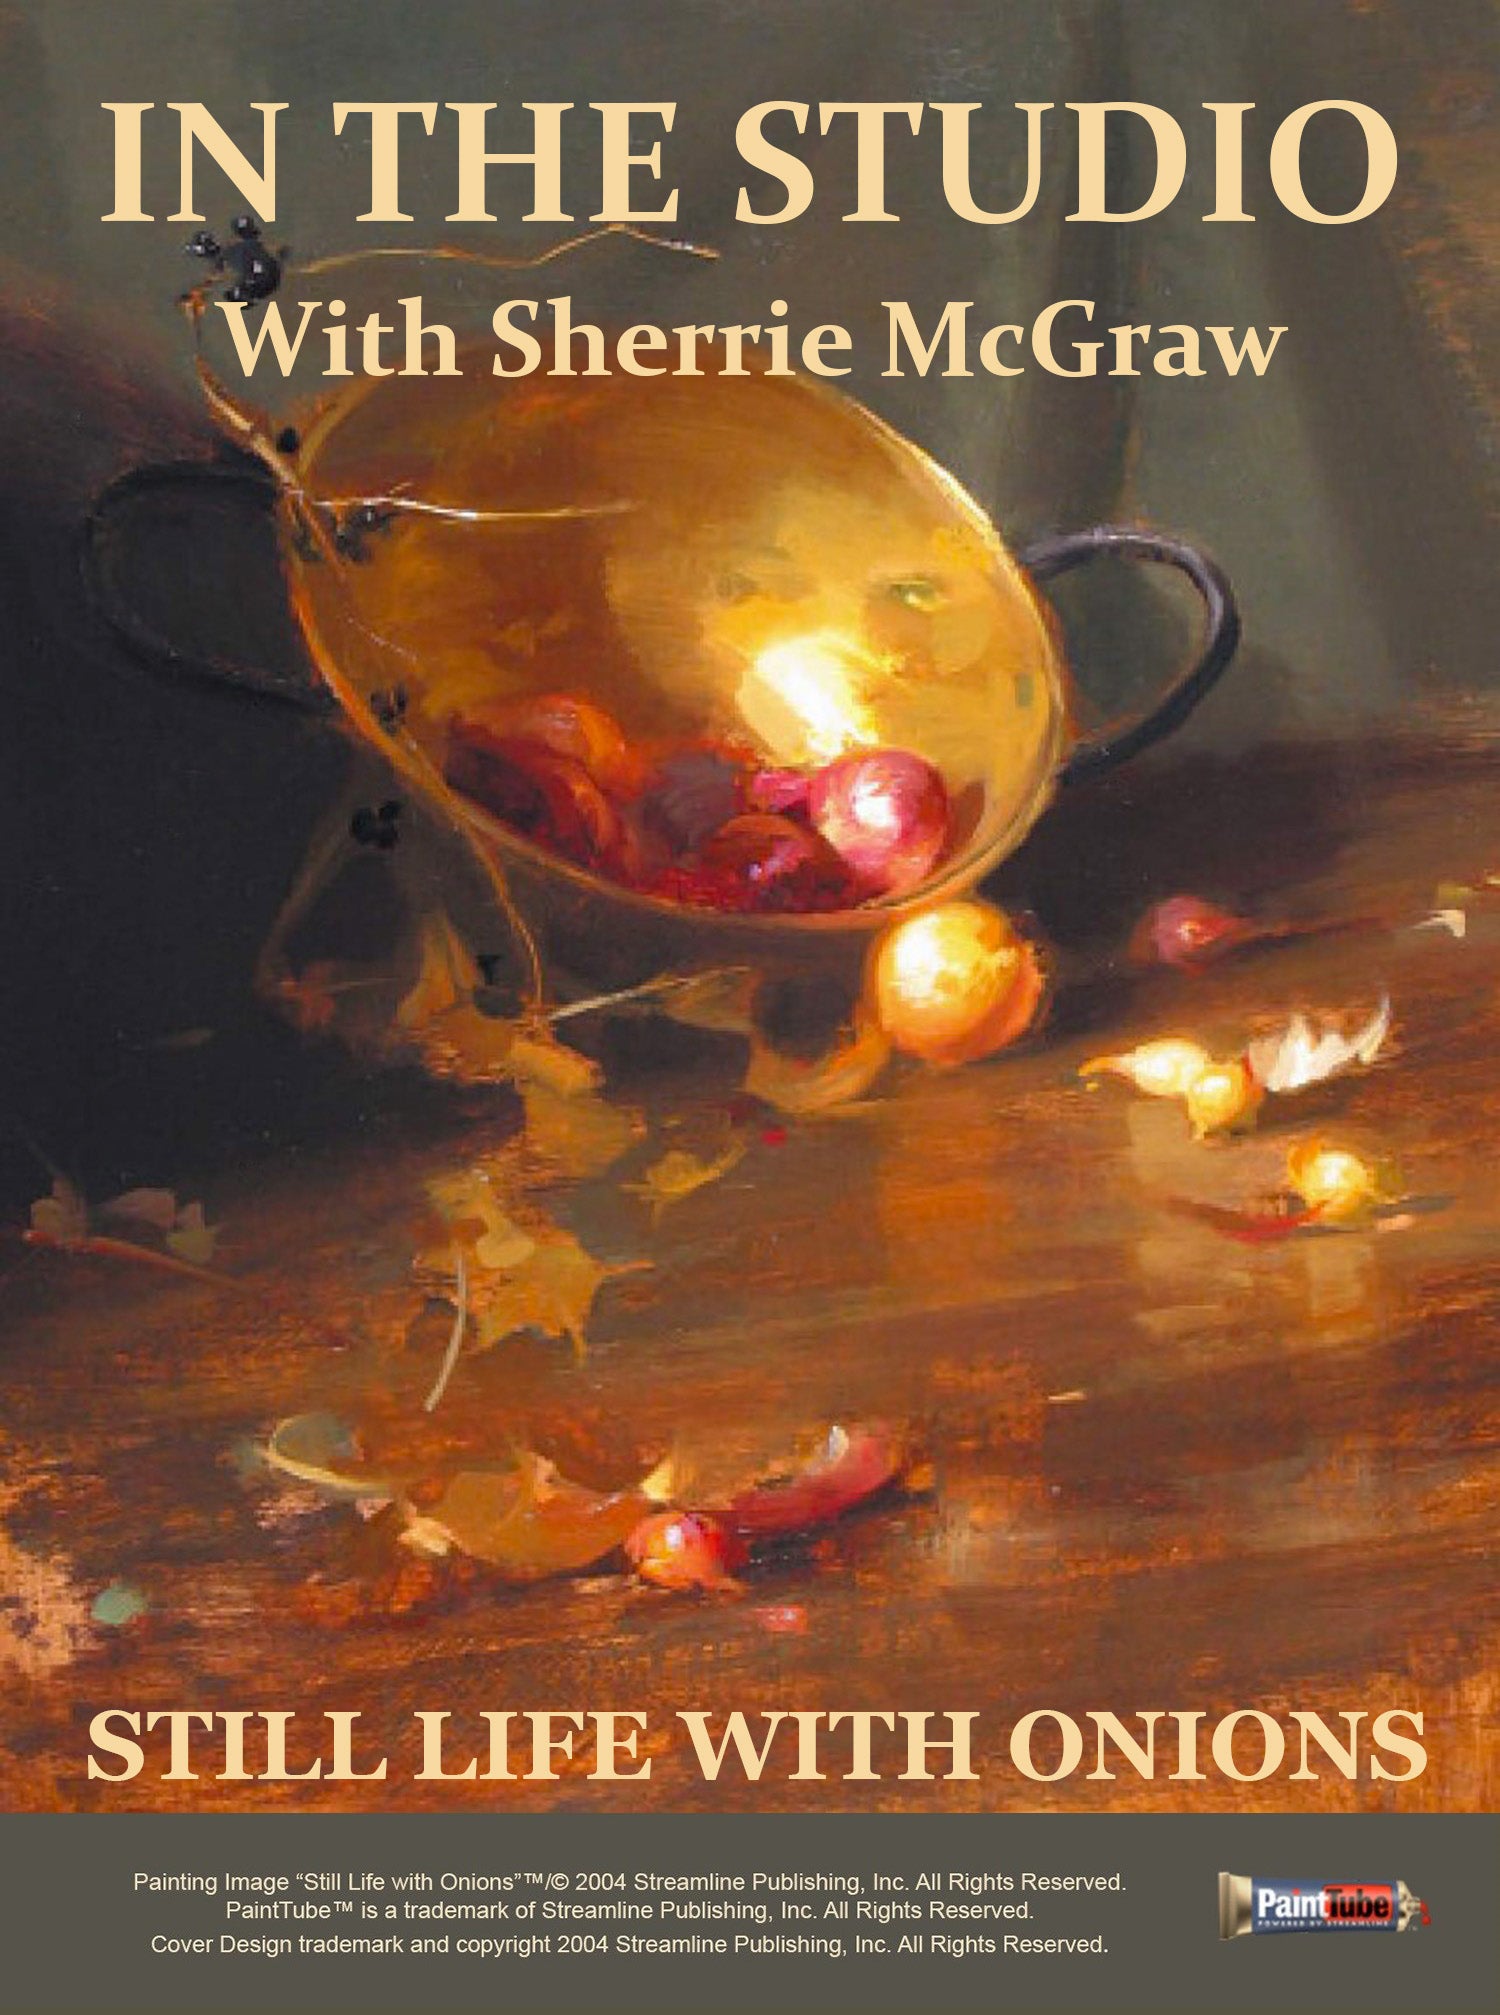 Sherrie McGraw: Still Life with Onions